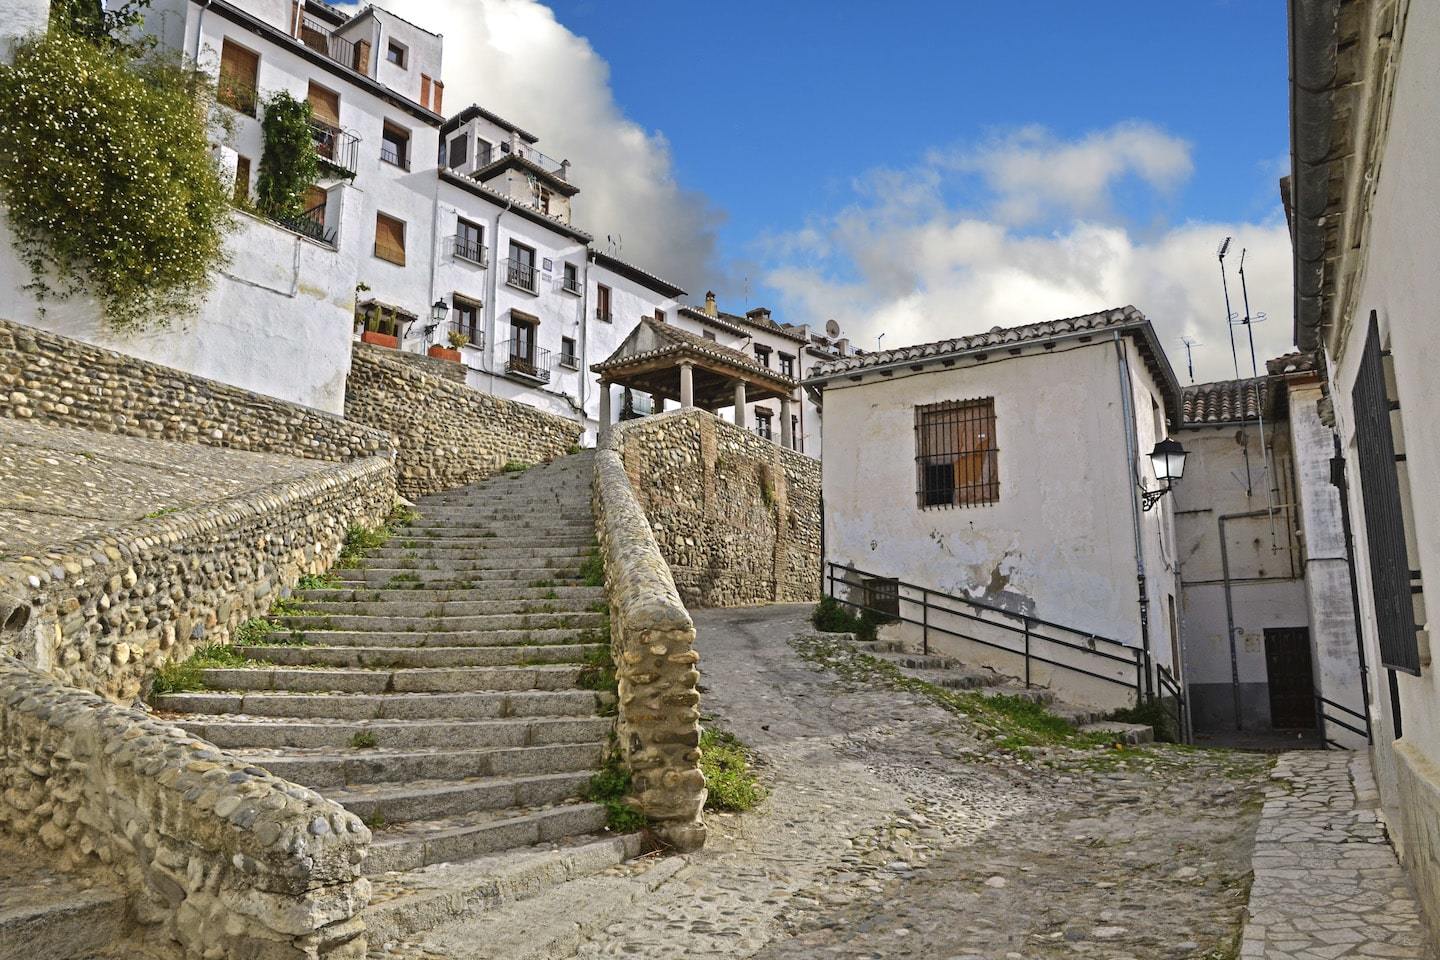 stone steps and buildings in front of blue sky